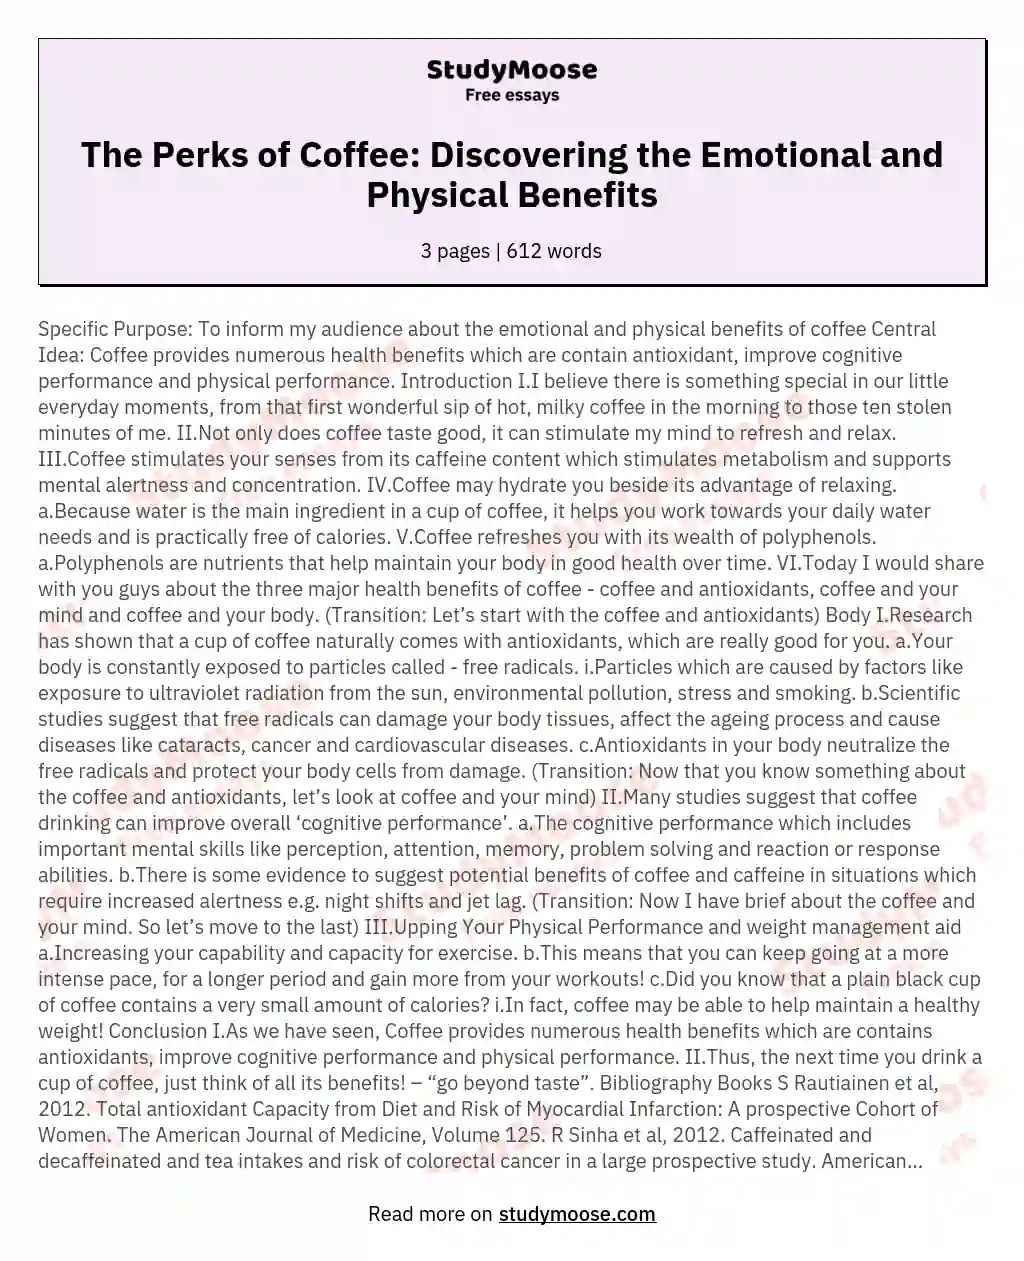 The Perks of Coffee: Discovering the Emotional and Physical Benefits essay